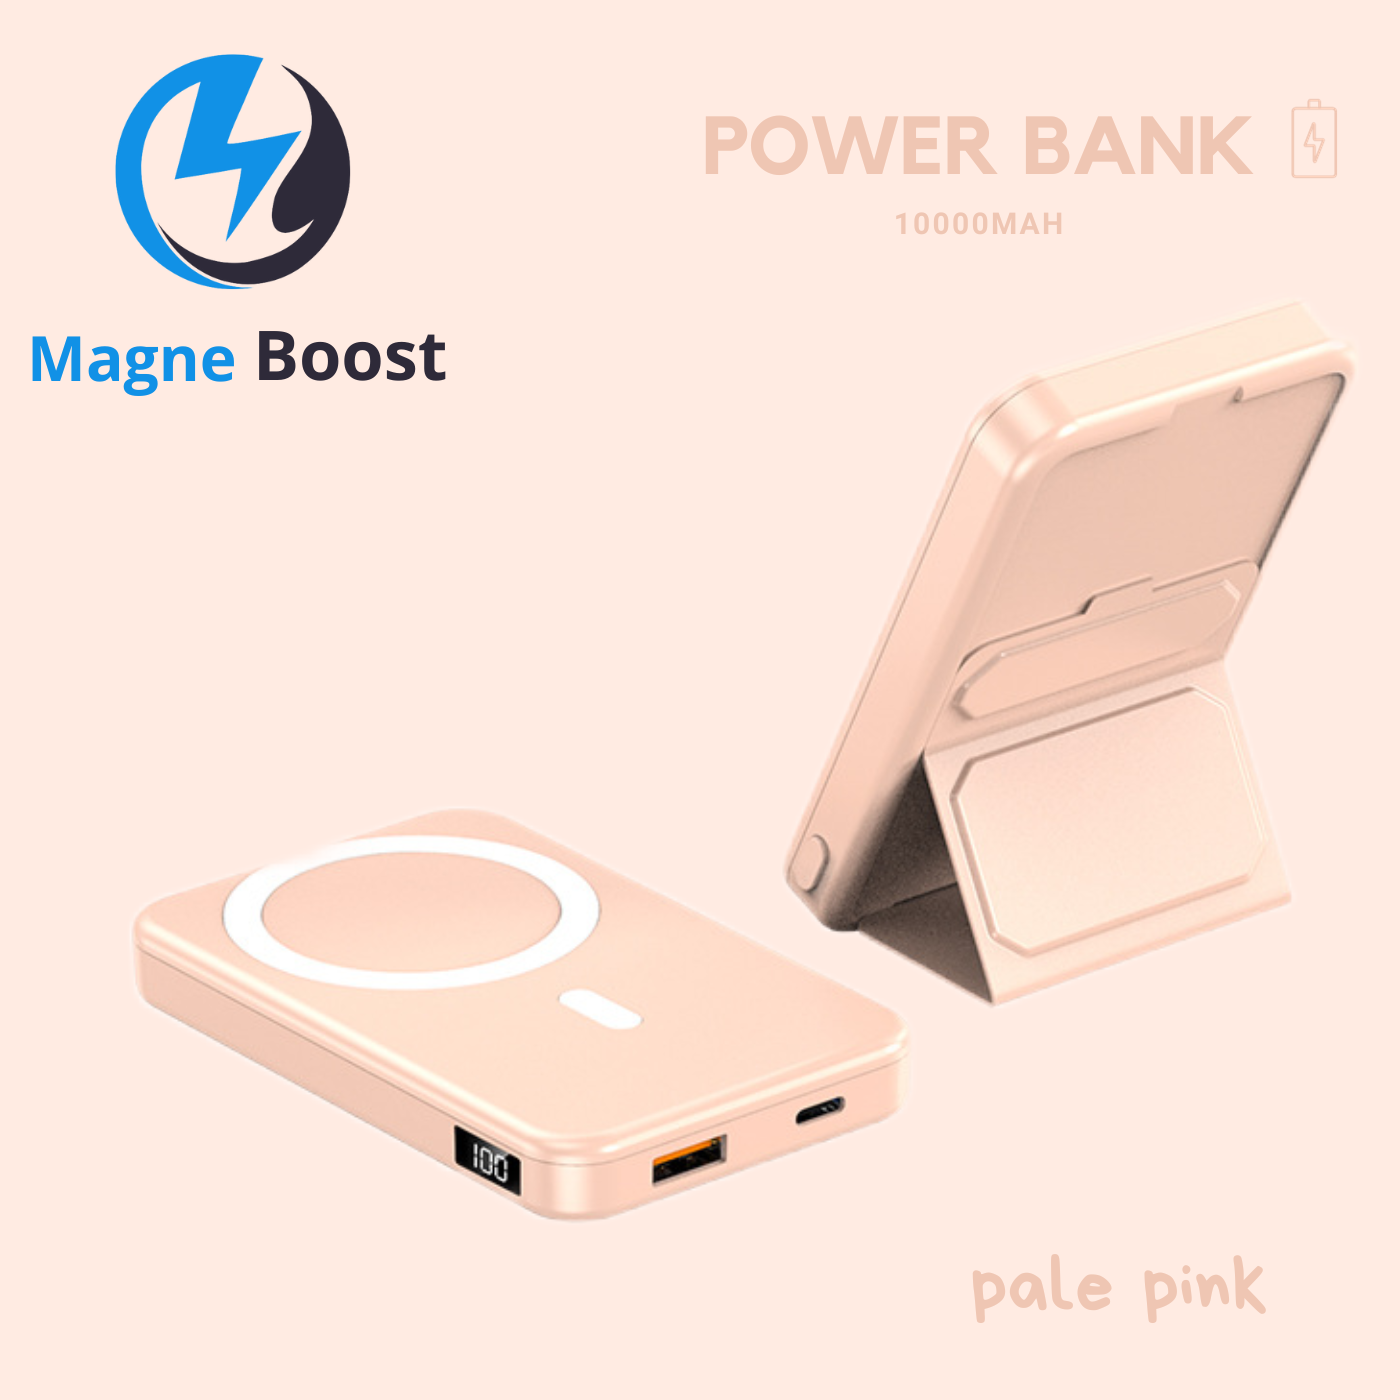 MagneBoost Charge+ and Charge++ (10000mAh and 20000mAh)